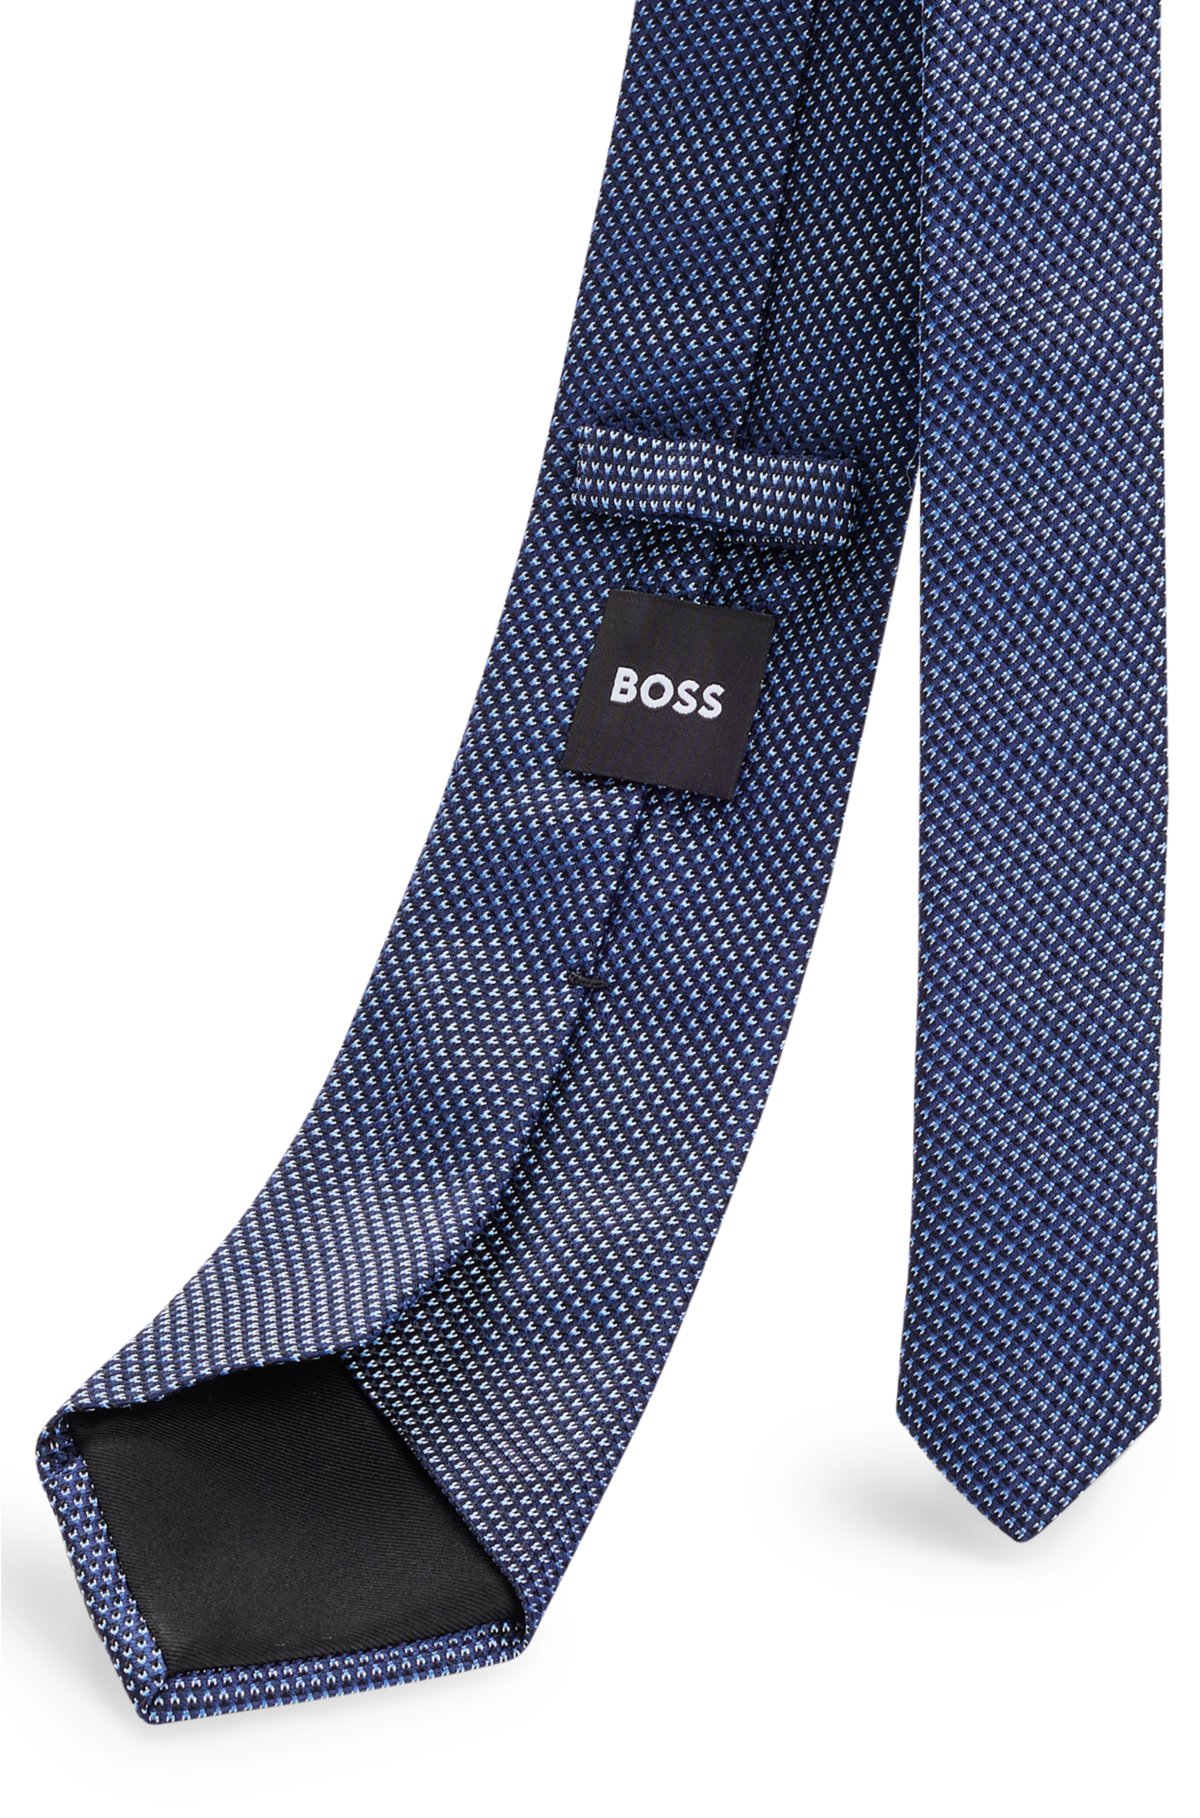 Silk-jacquard tie with all-over micro pattern, Dark Blue